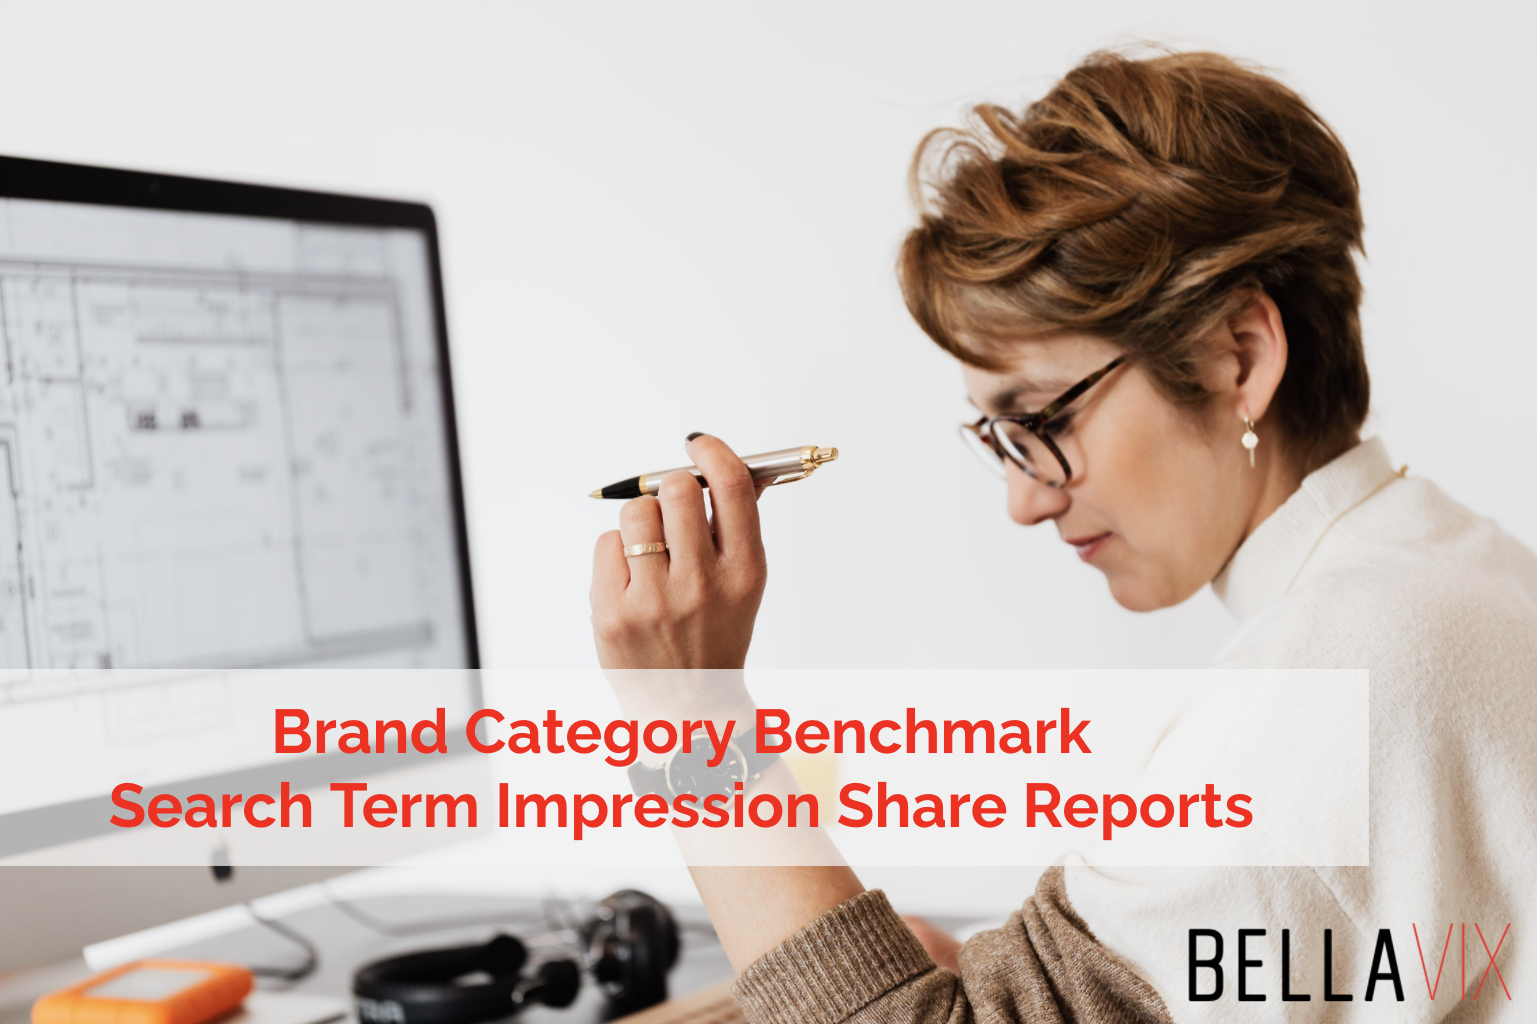 Brand Category Benchmark & Search Term Impression Share Reports